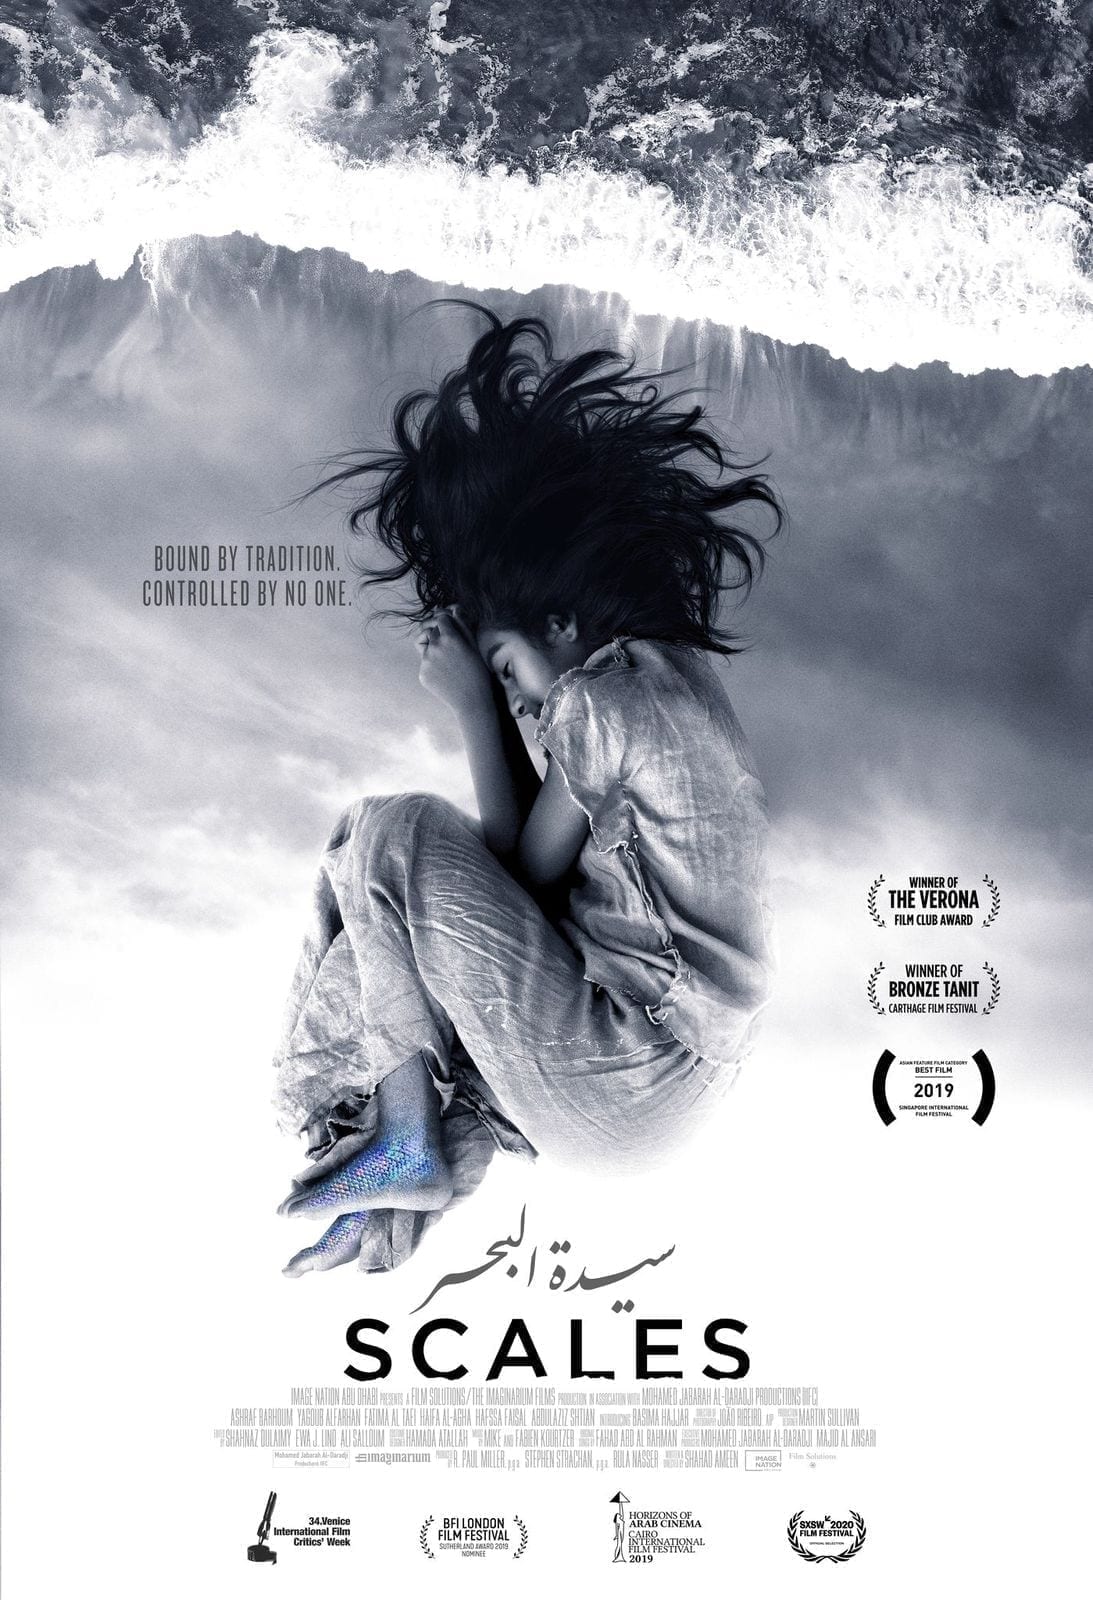 Writer and Director Shahad Ameen's movie, Scales, selected as Saudi Arabia’s national submission for the 2021 Academy Awards